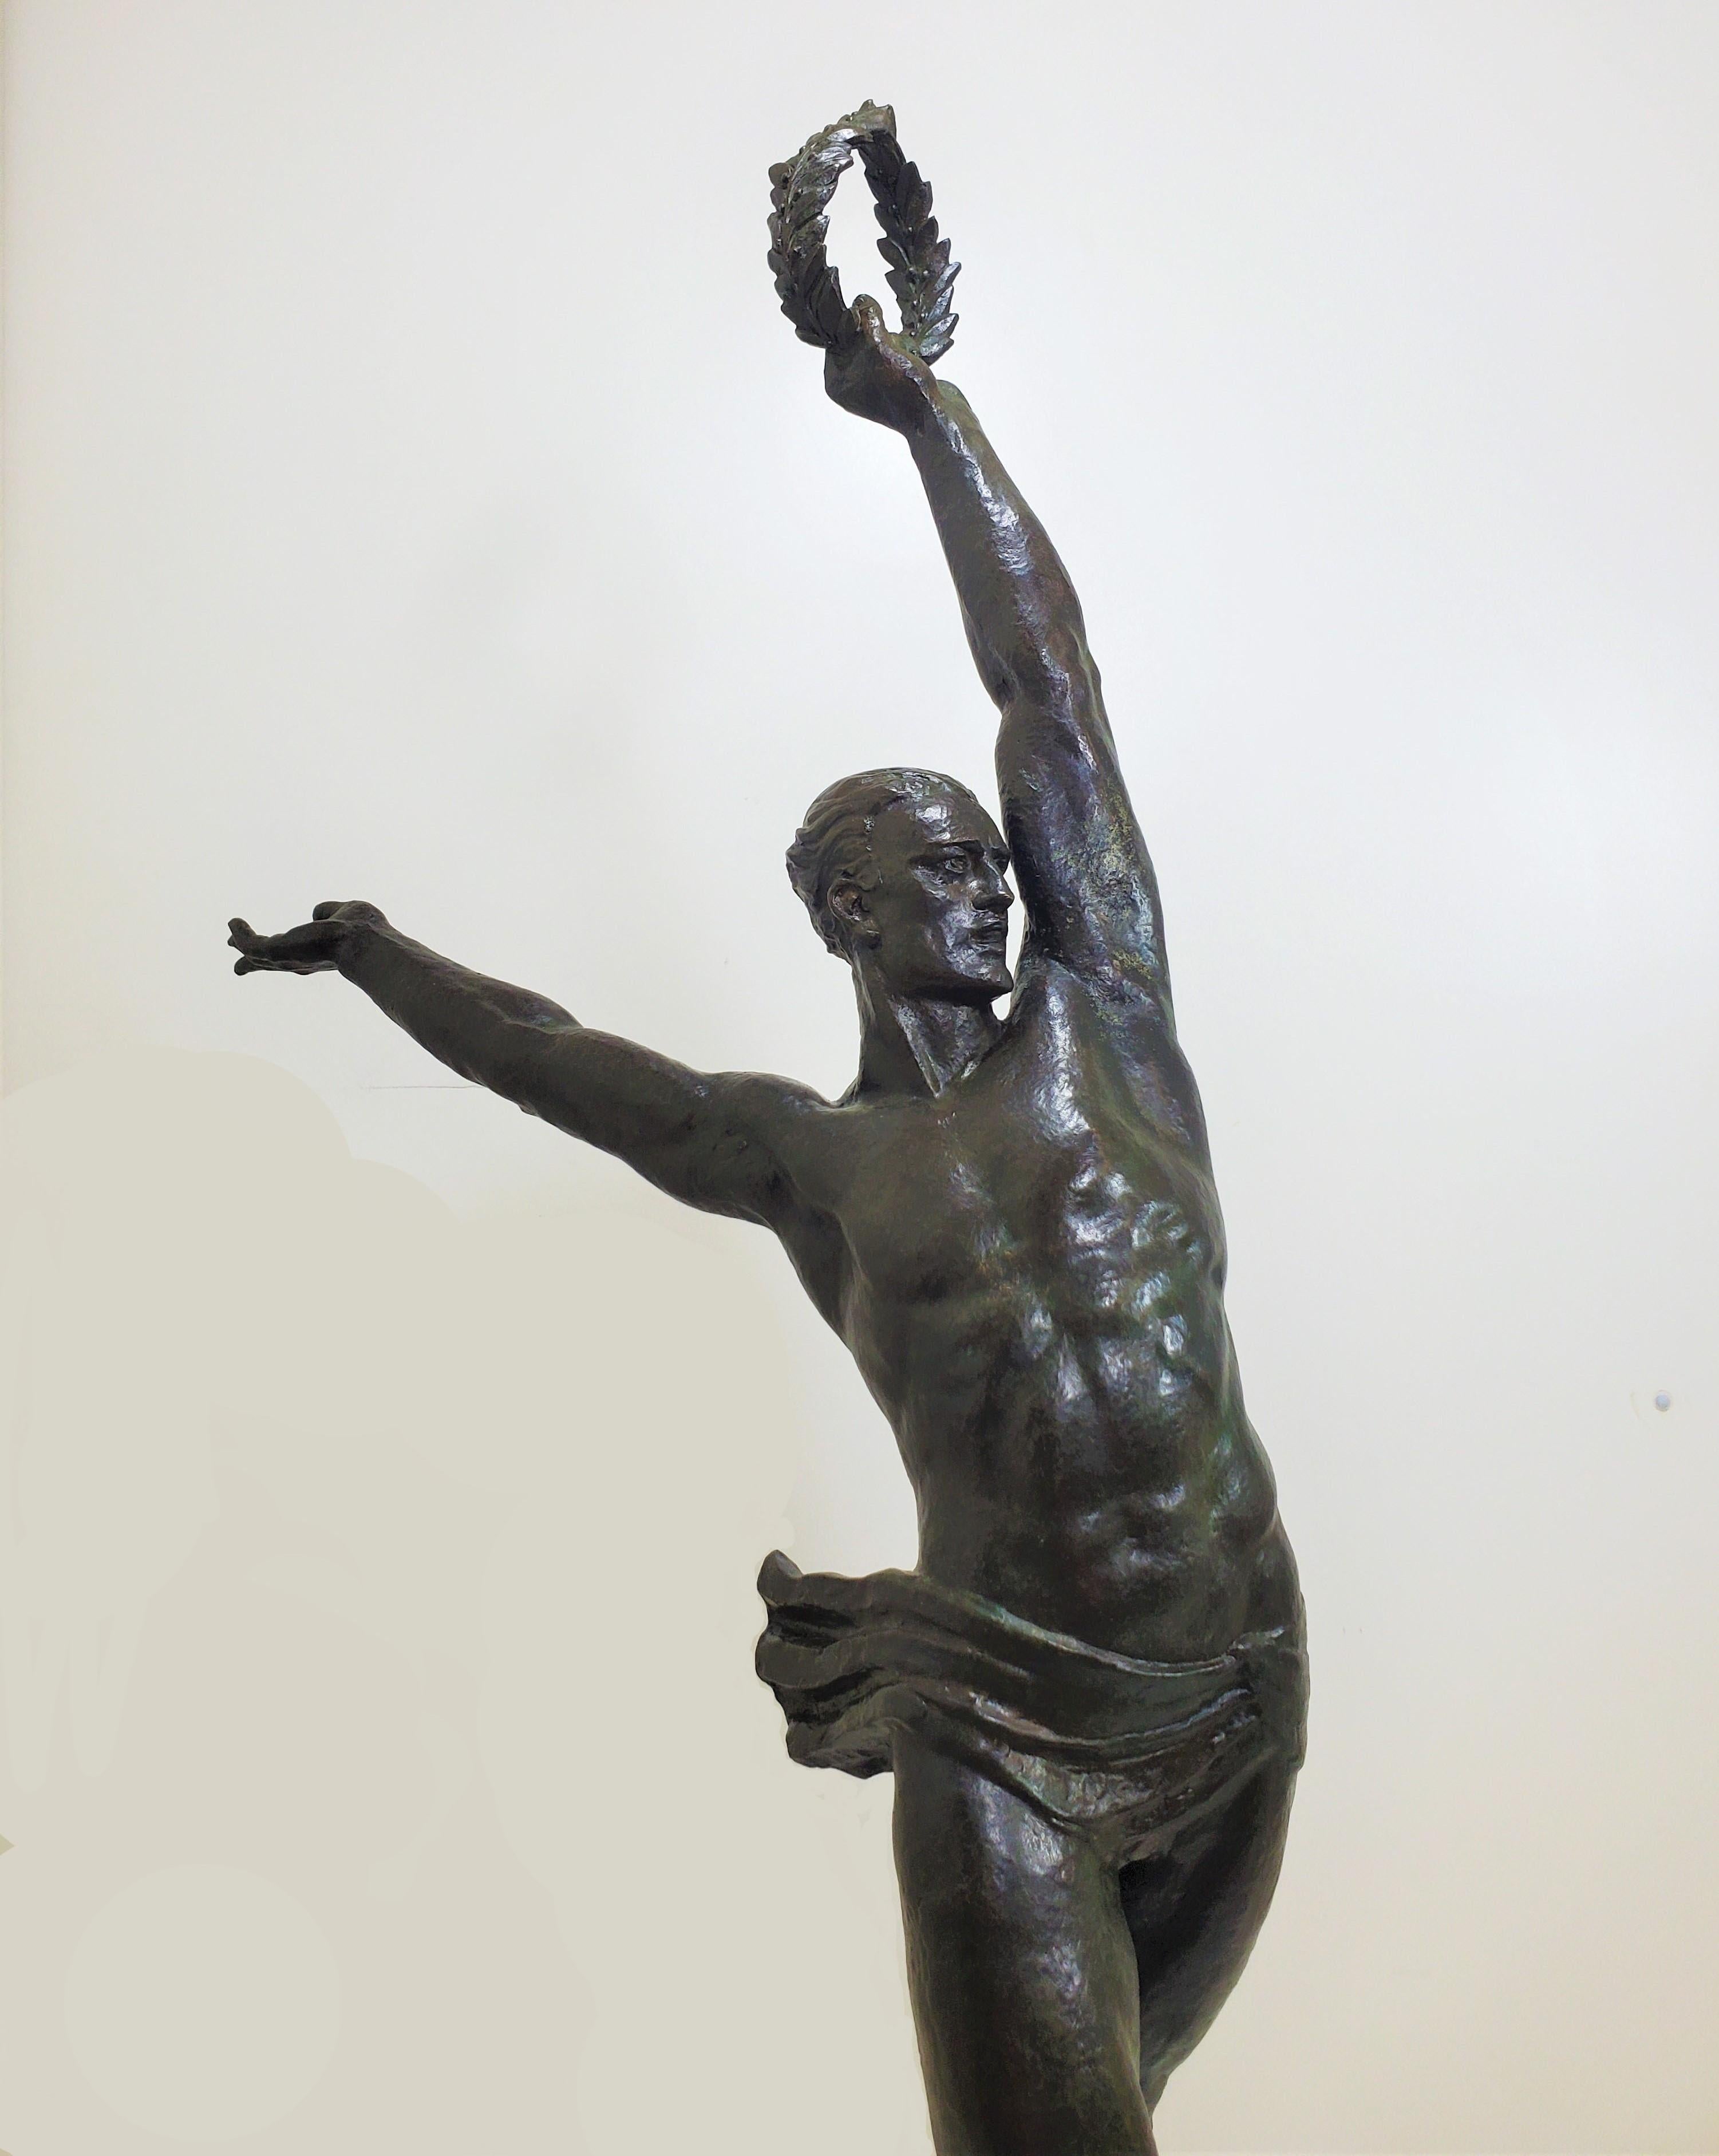 20th Century Large Original French Art Deco Bronze of a Semi-Nude Male Athlete by Le Faguays For Sale